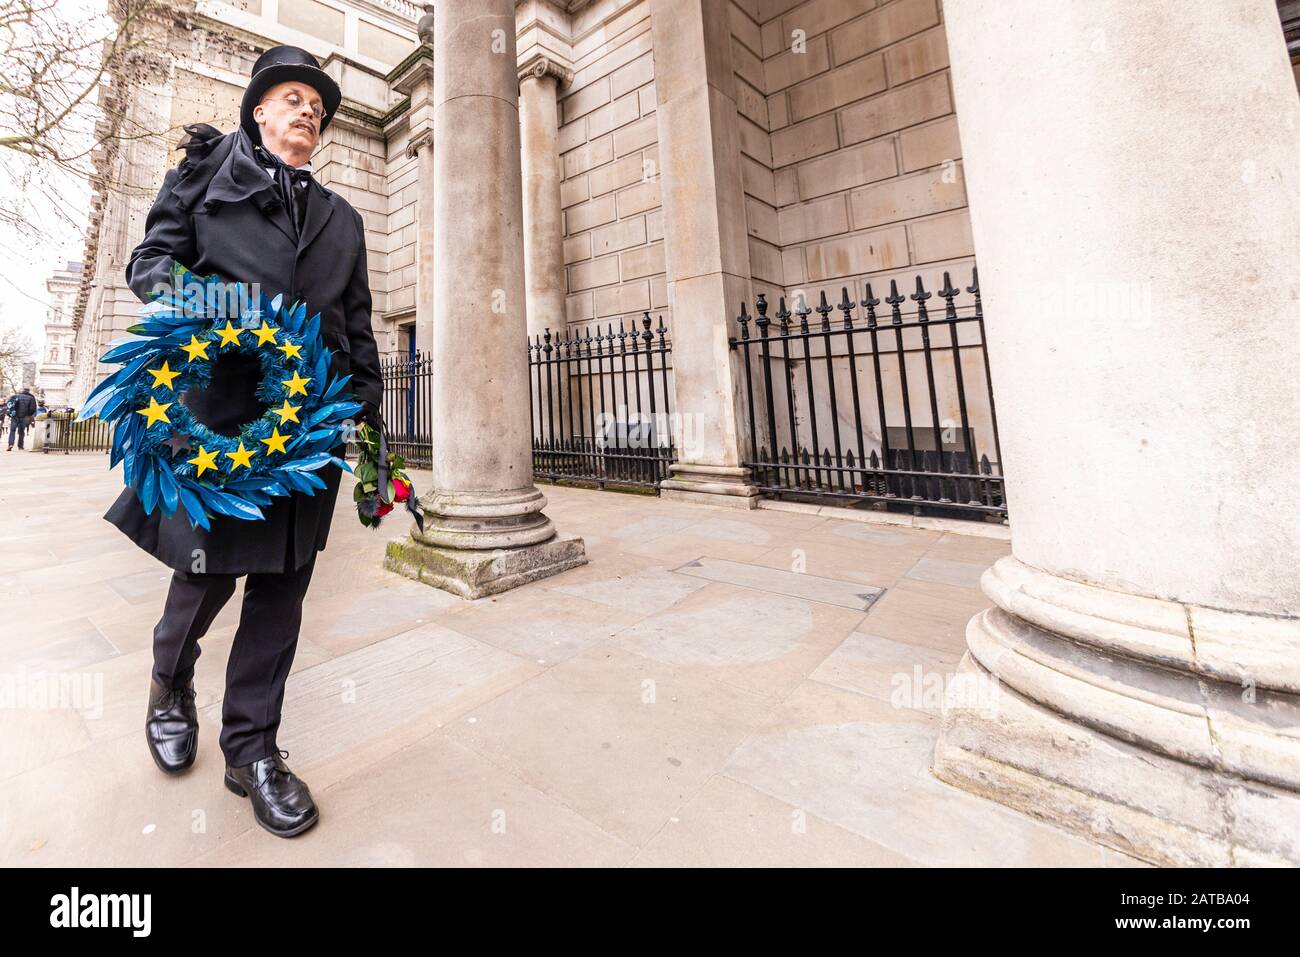 White male in funeral attire carrying a wreath in European Union flag colours mourning exit from EU on Brexit Day, 31 January 2020, in London, UK Stock Photo